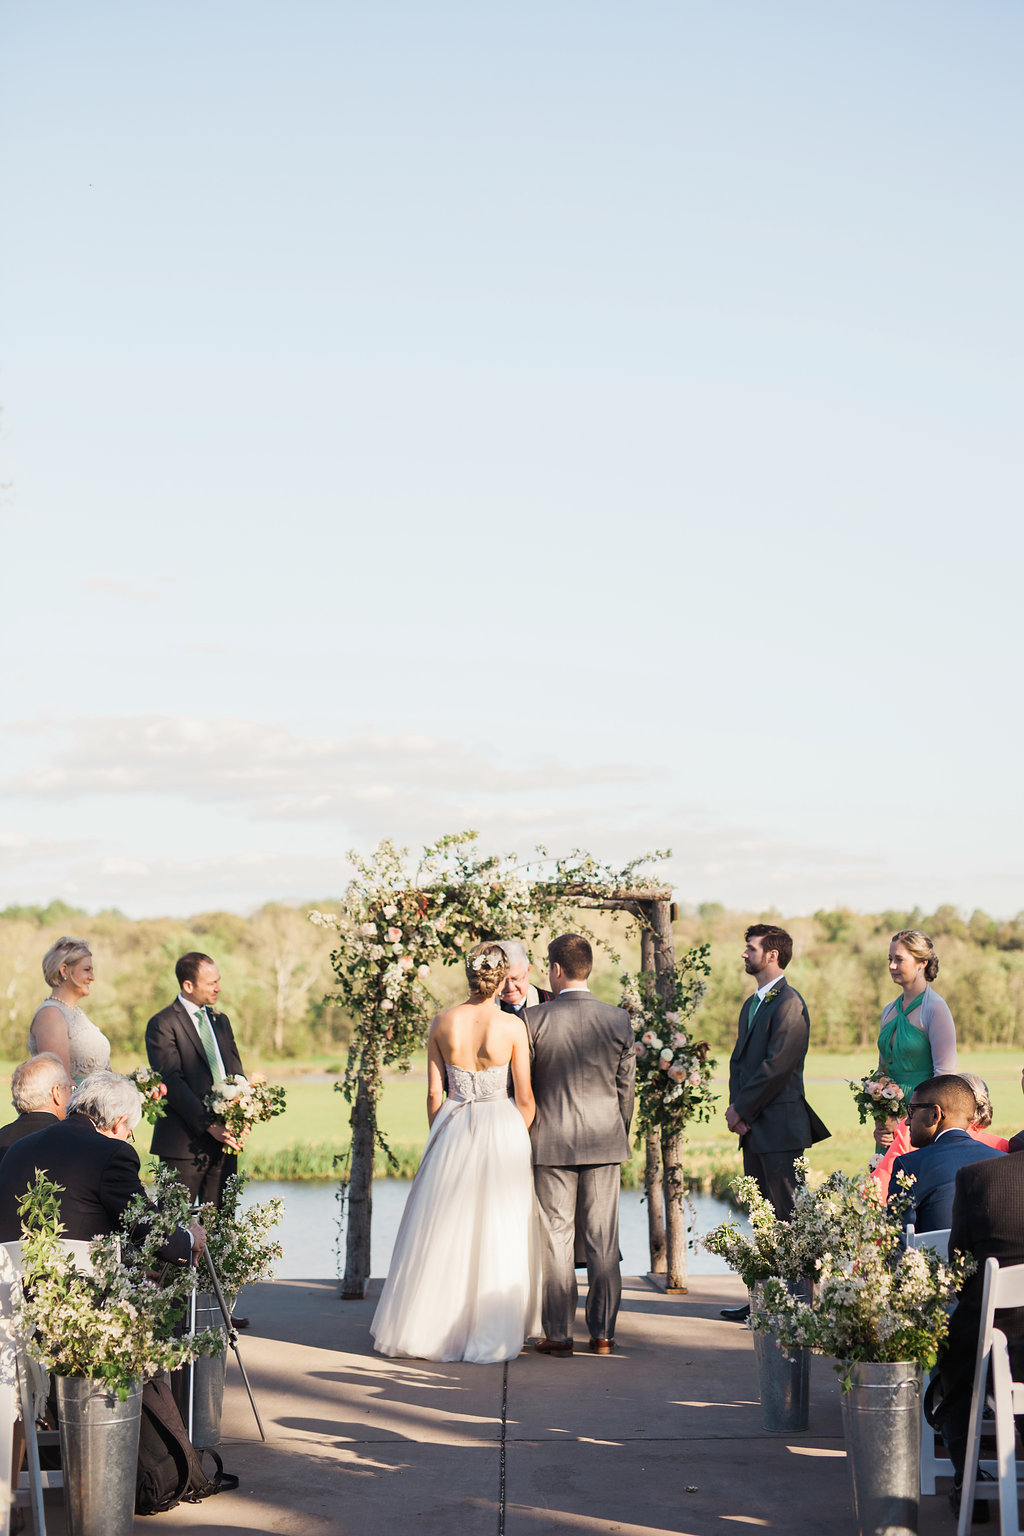 Riverside on the Potomac Leesburg Virginia outdoor wedding ceremony - Carly Romeo Photography - Bellwether Events - floral arch by LynnVale Studio